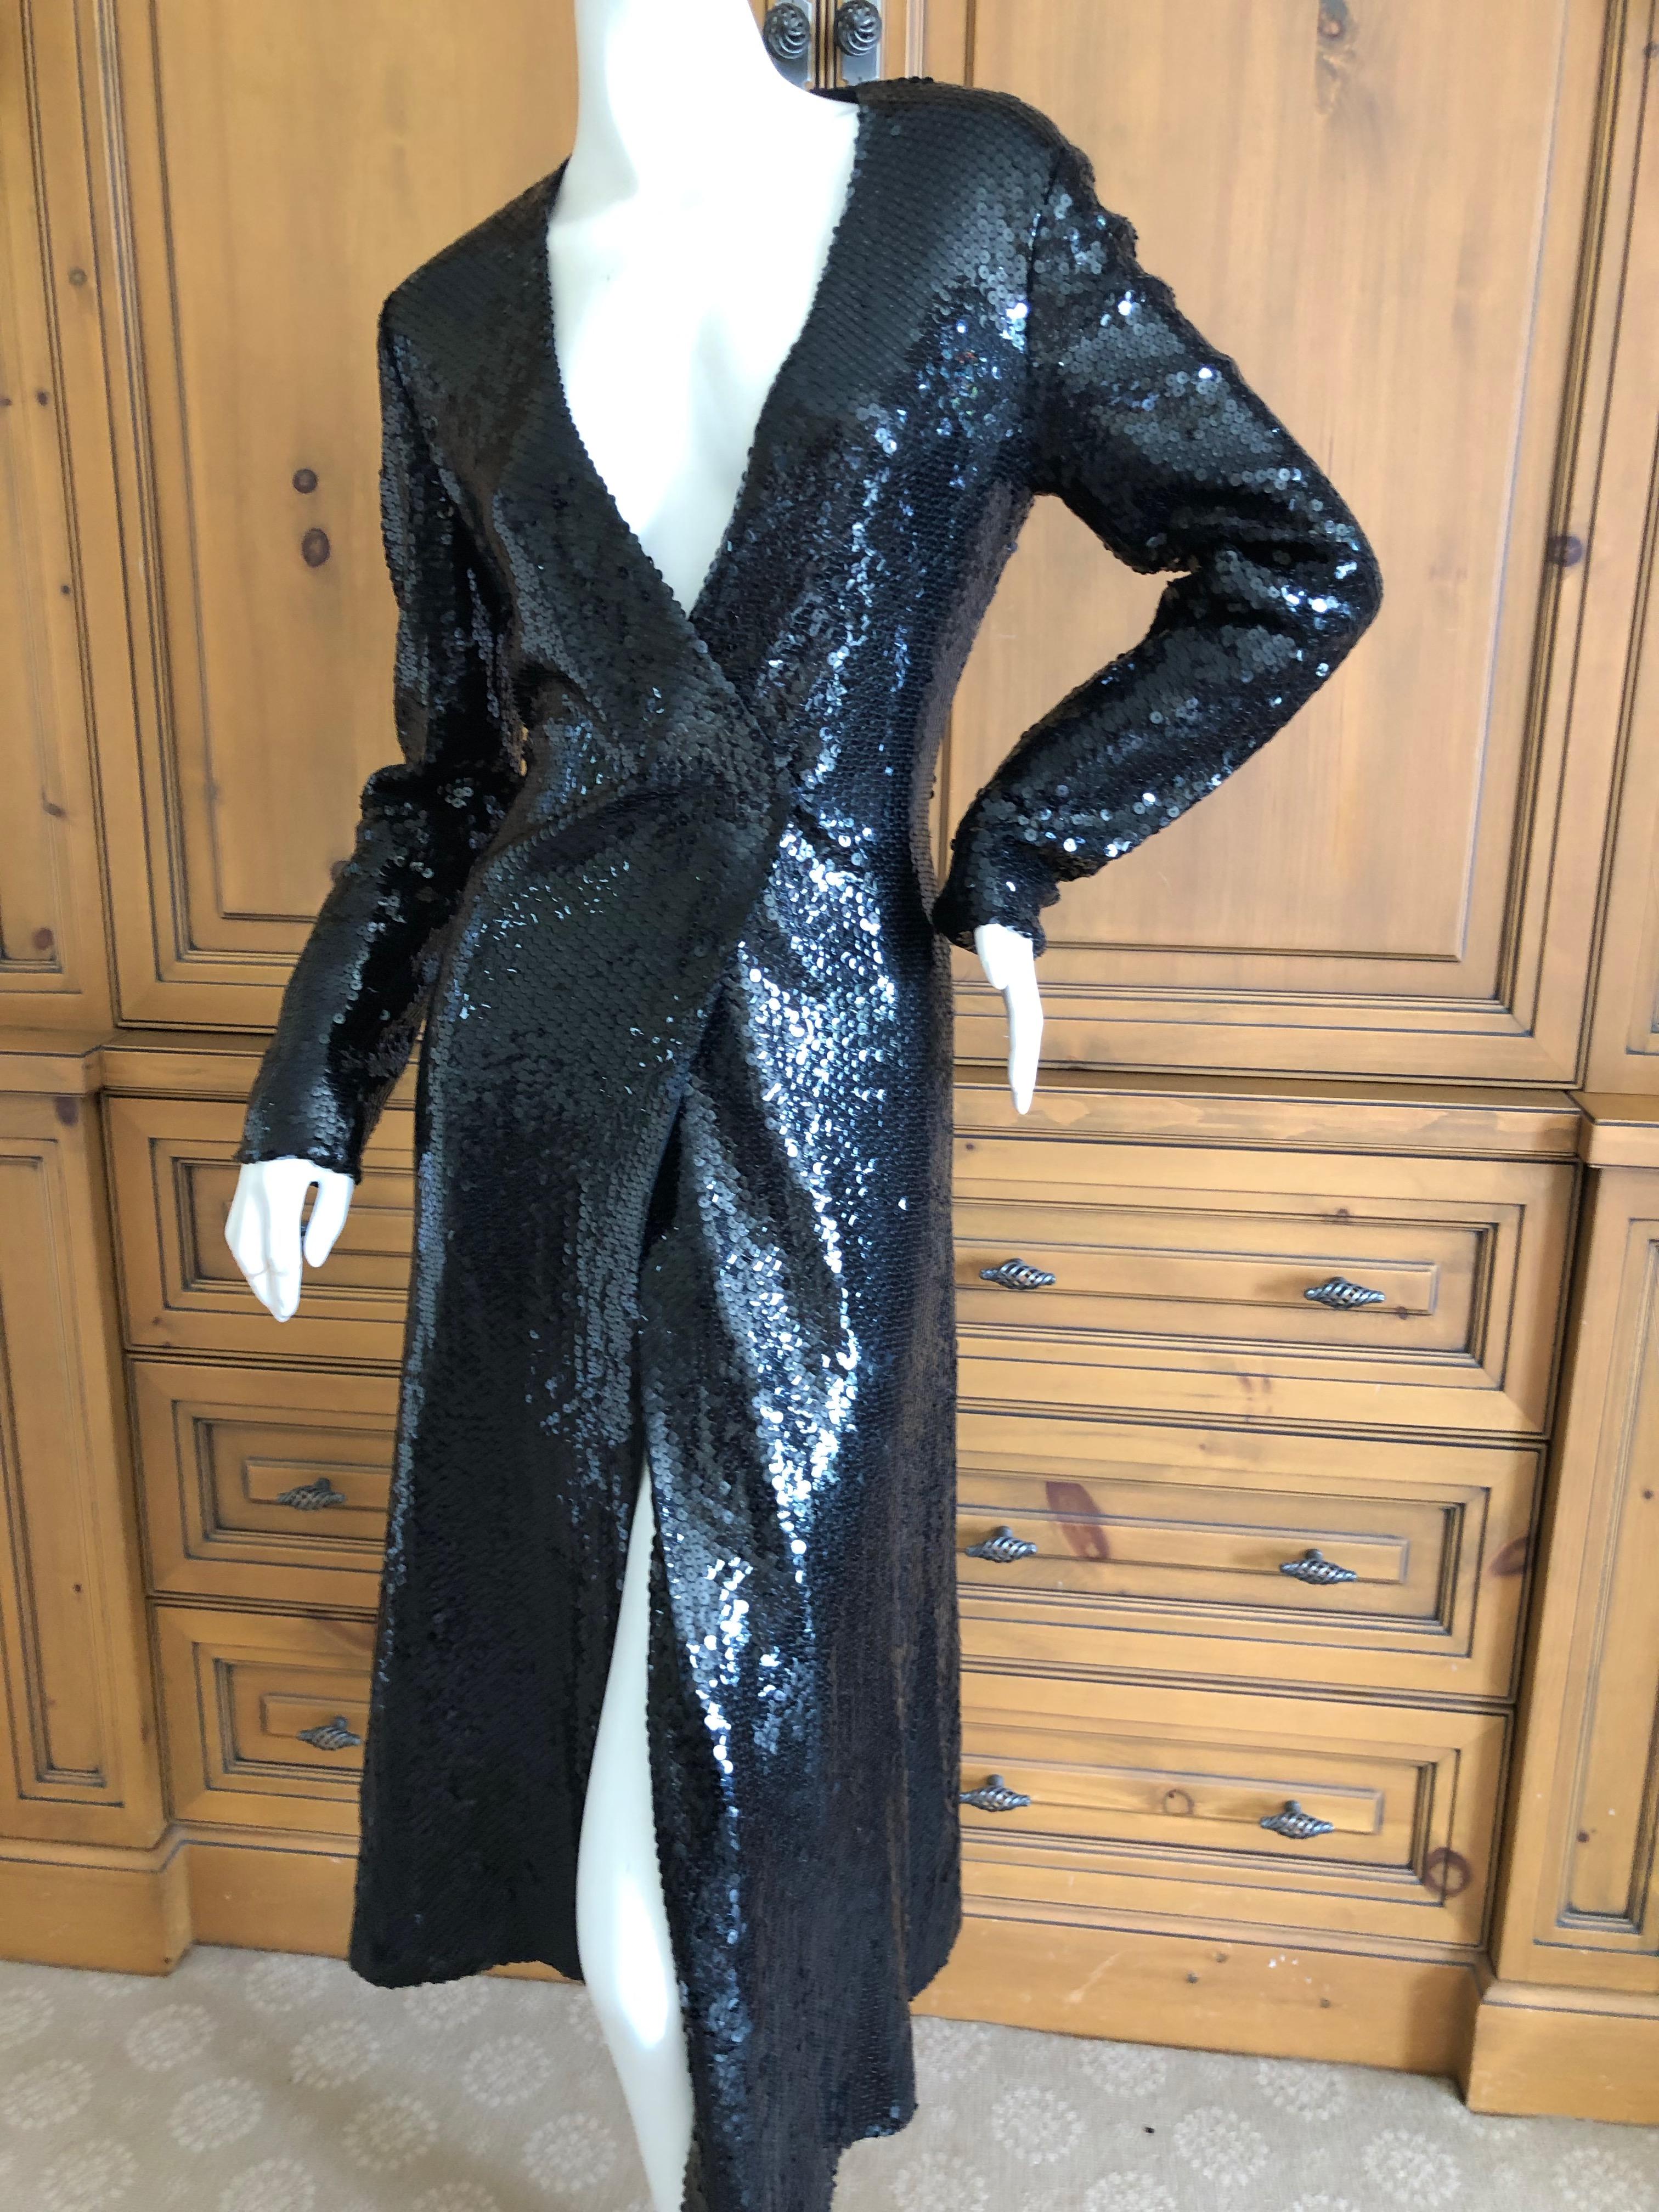 Halston 1970's Disco Era Low Cut Sequin Little Black Dress
This is so much prettier than the photos show, and needs to be seen in motion, preferably under the disco ball.
This is stunning, wrap style dress with snap closures.
Size L, no size